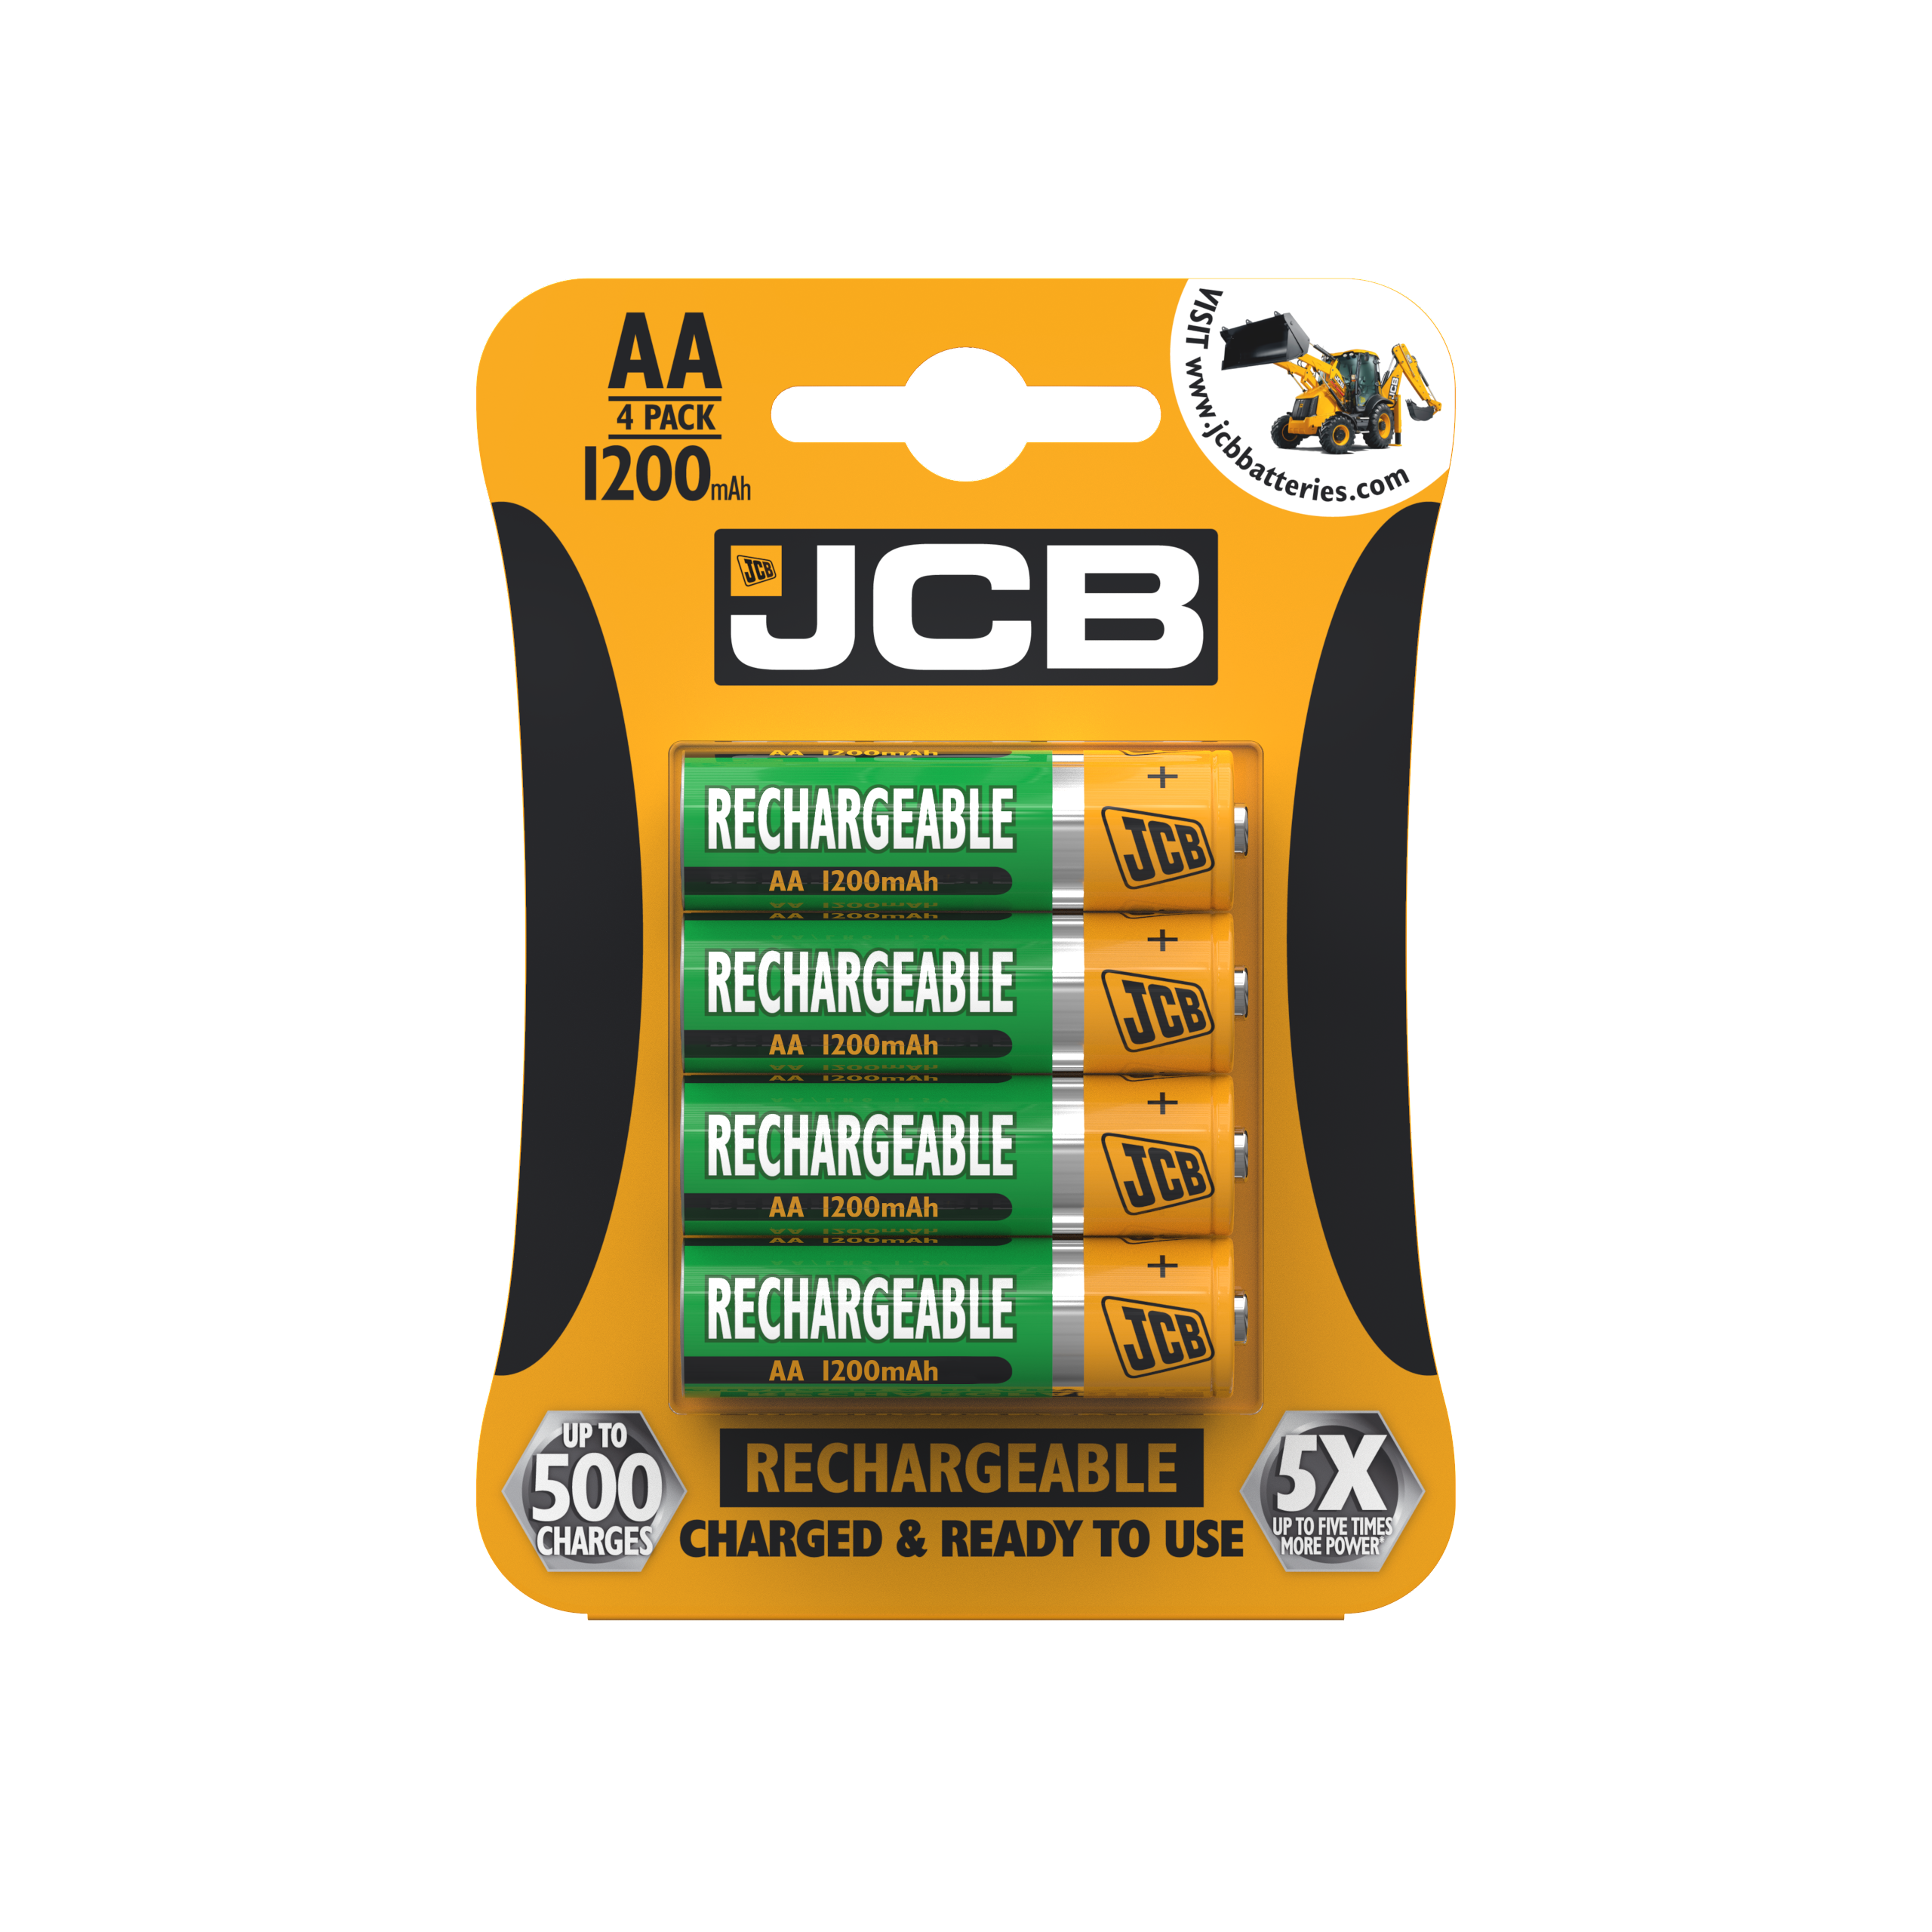 JCB AA 1200mAh Rechargeable, Pack of 4